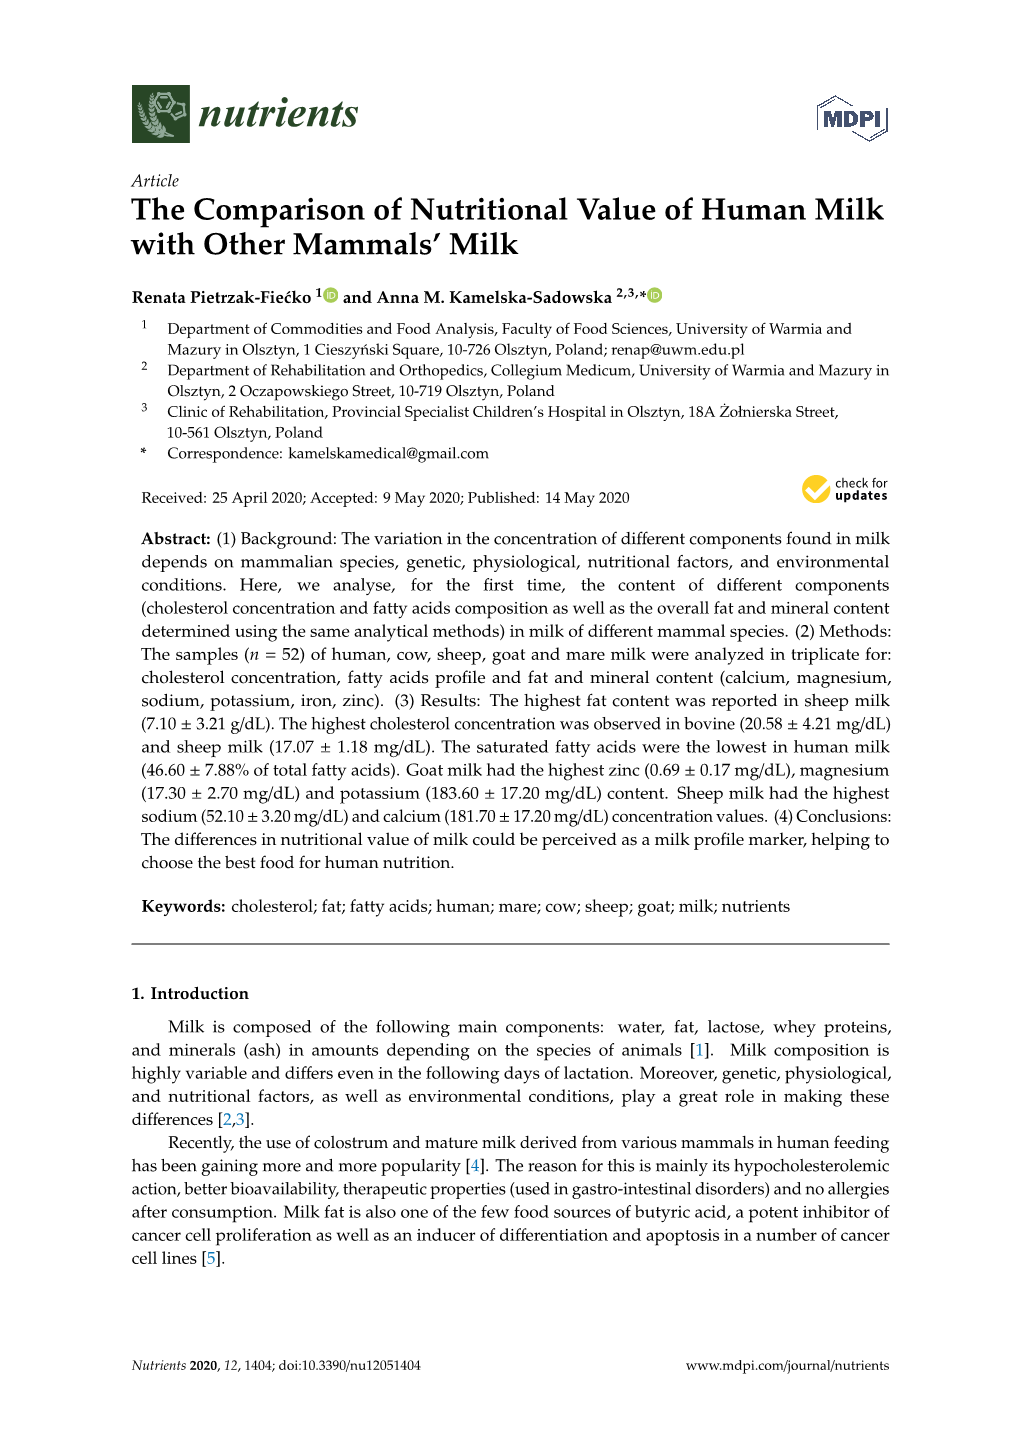 The Comparison of Nutritional Value of Human Milk with Other Mammals' Milk